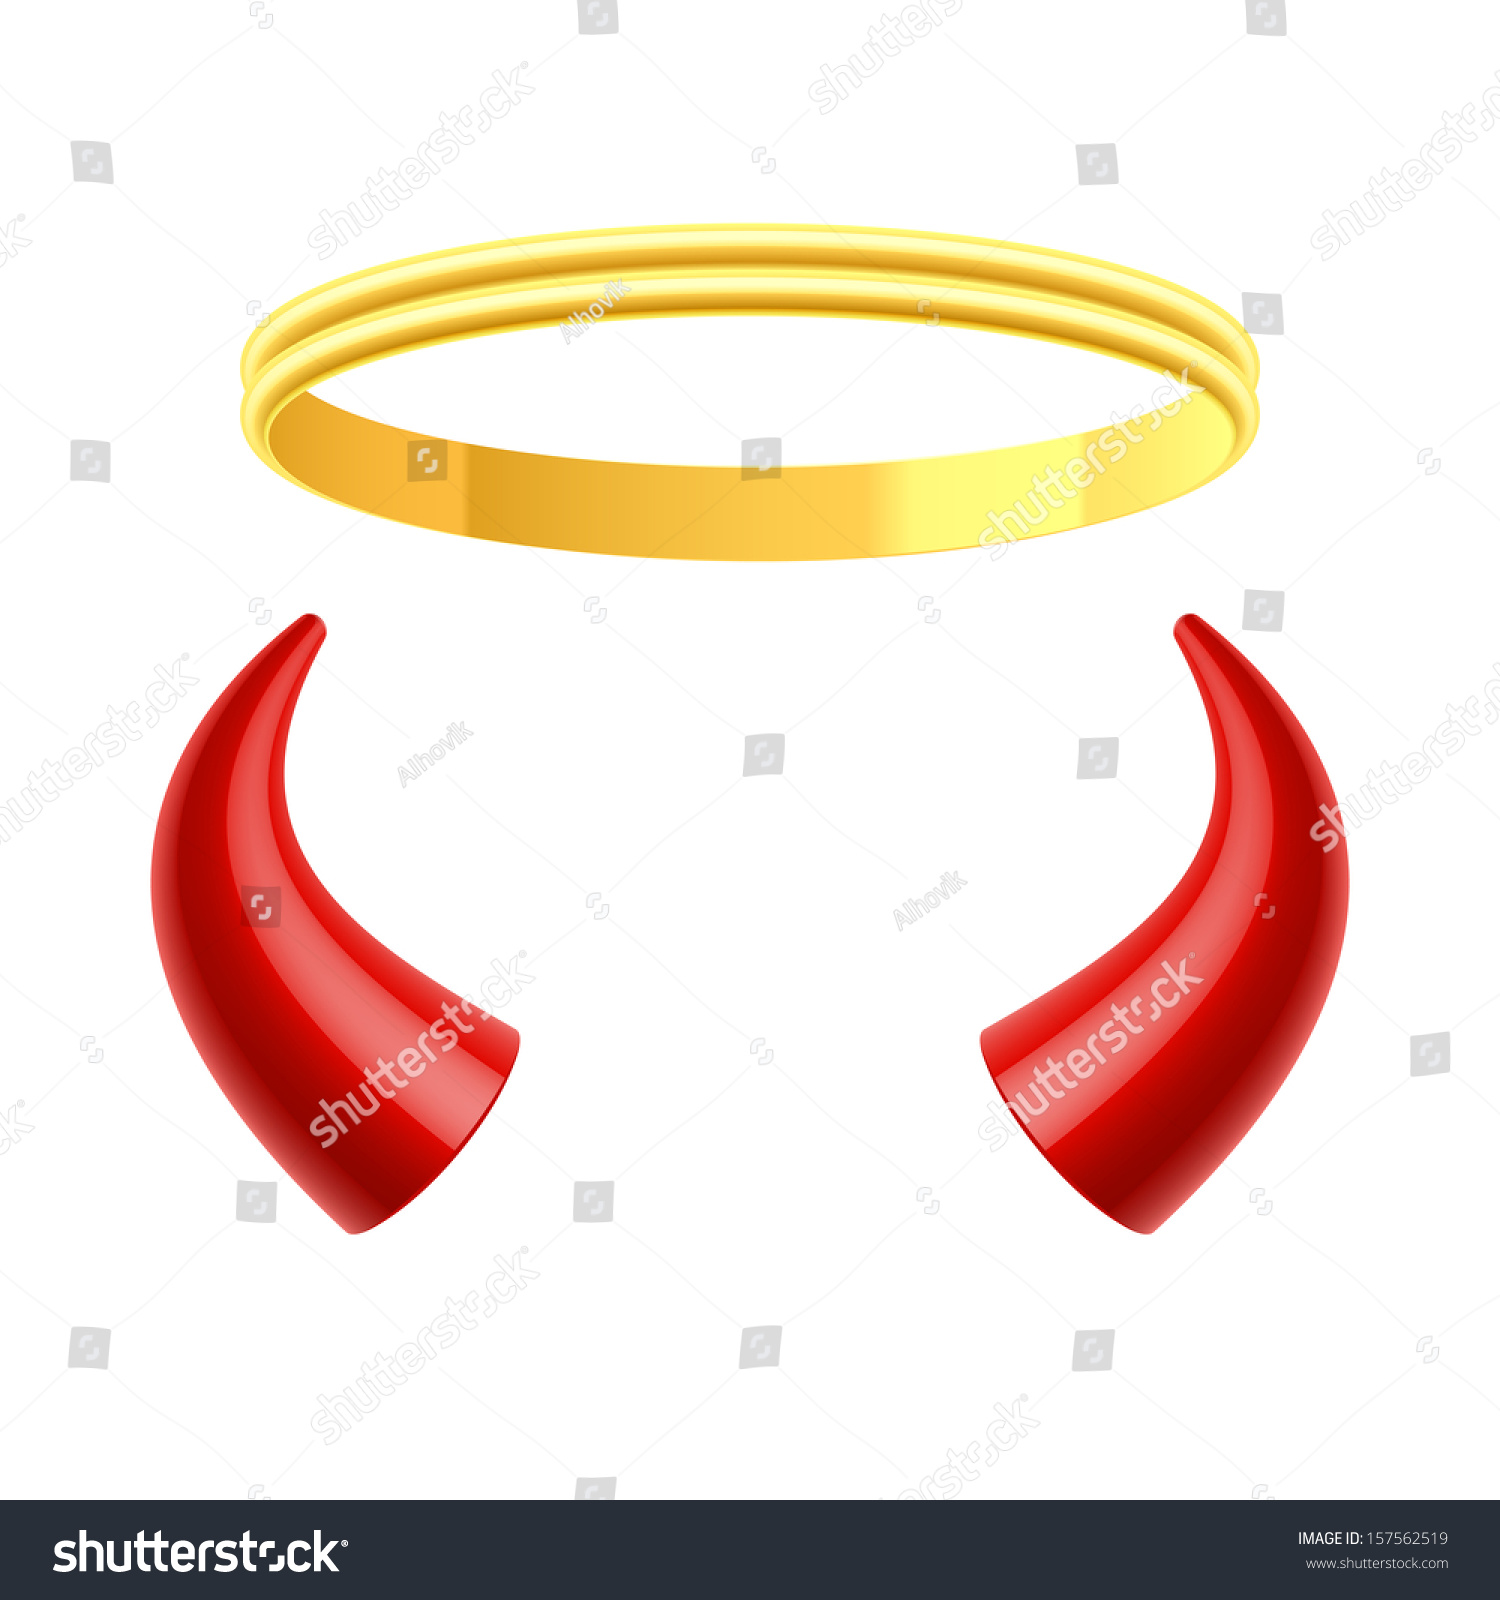 SVG of Angel's halo and devil's horns. Vector. svg